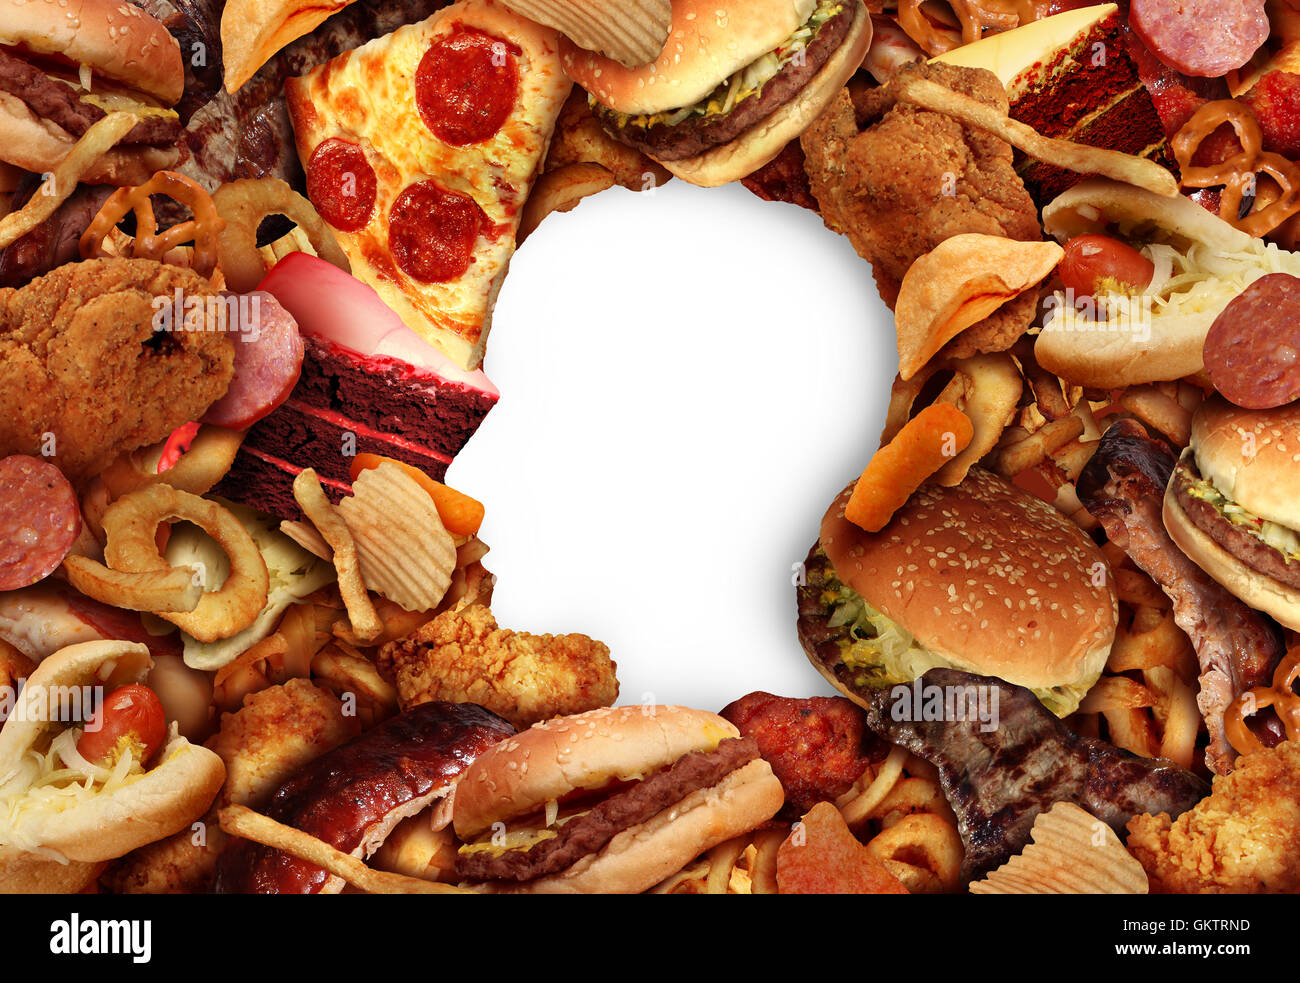 Eating fatty food and unhealthy diet health concept with a group of greasy fast food in the shape of a human head symbol of dangerous nutrition lifestyle and icon of addiction to risky snacks in a 3D illustration style. Stock Photo